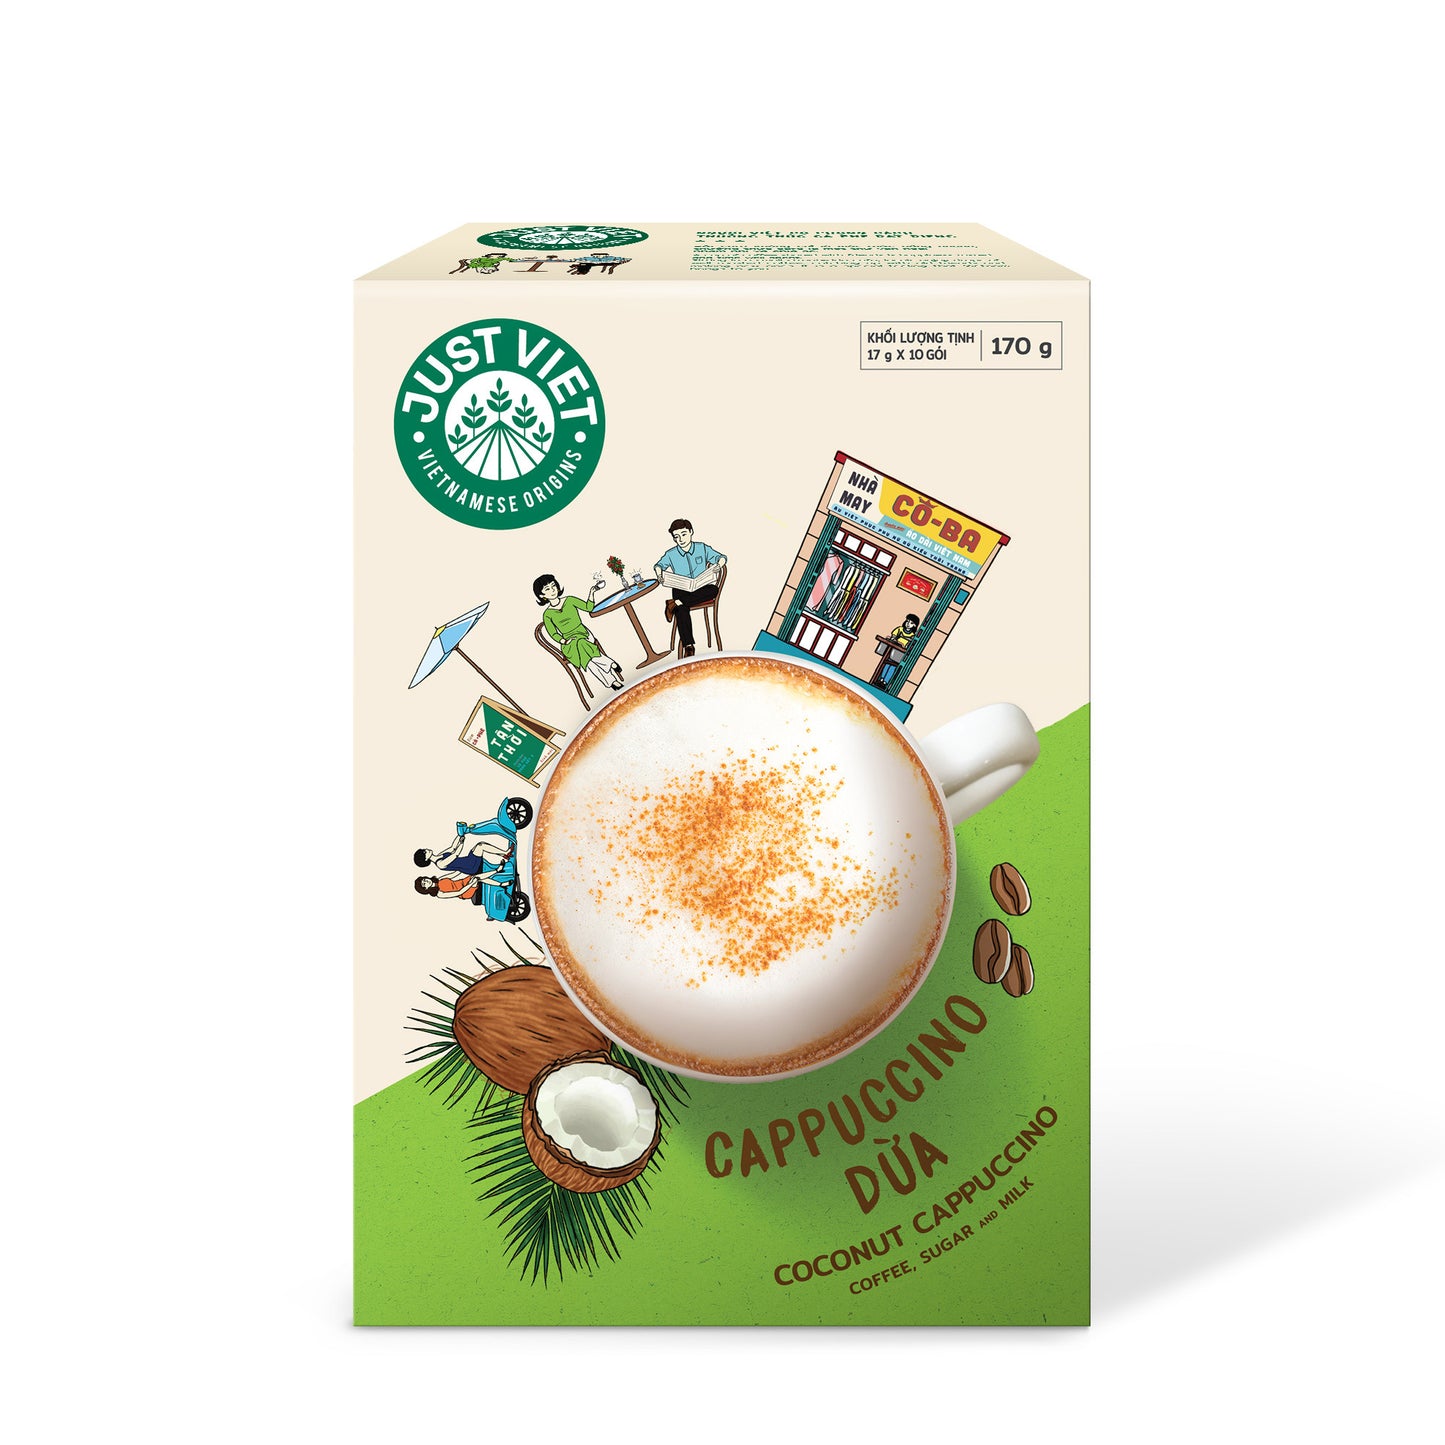 Just Viet_ Coconut & Durian Cappuccino Coffee- Authentic Vietnamese Taste - Naturally Rich Blend - BOX of 10 PACKS x 17g